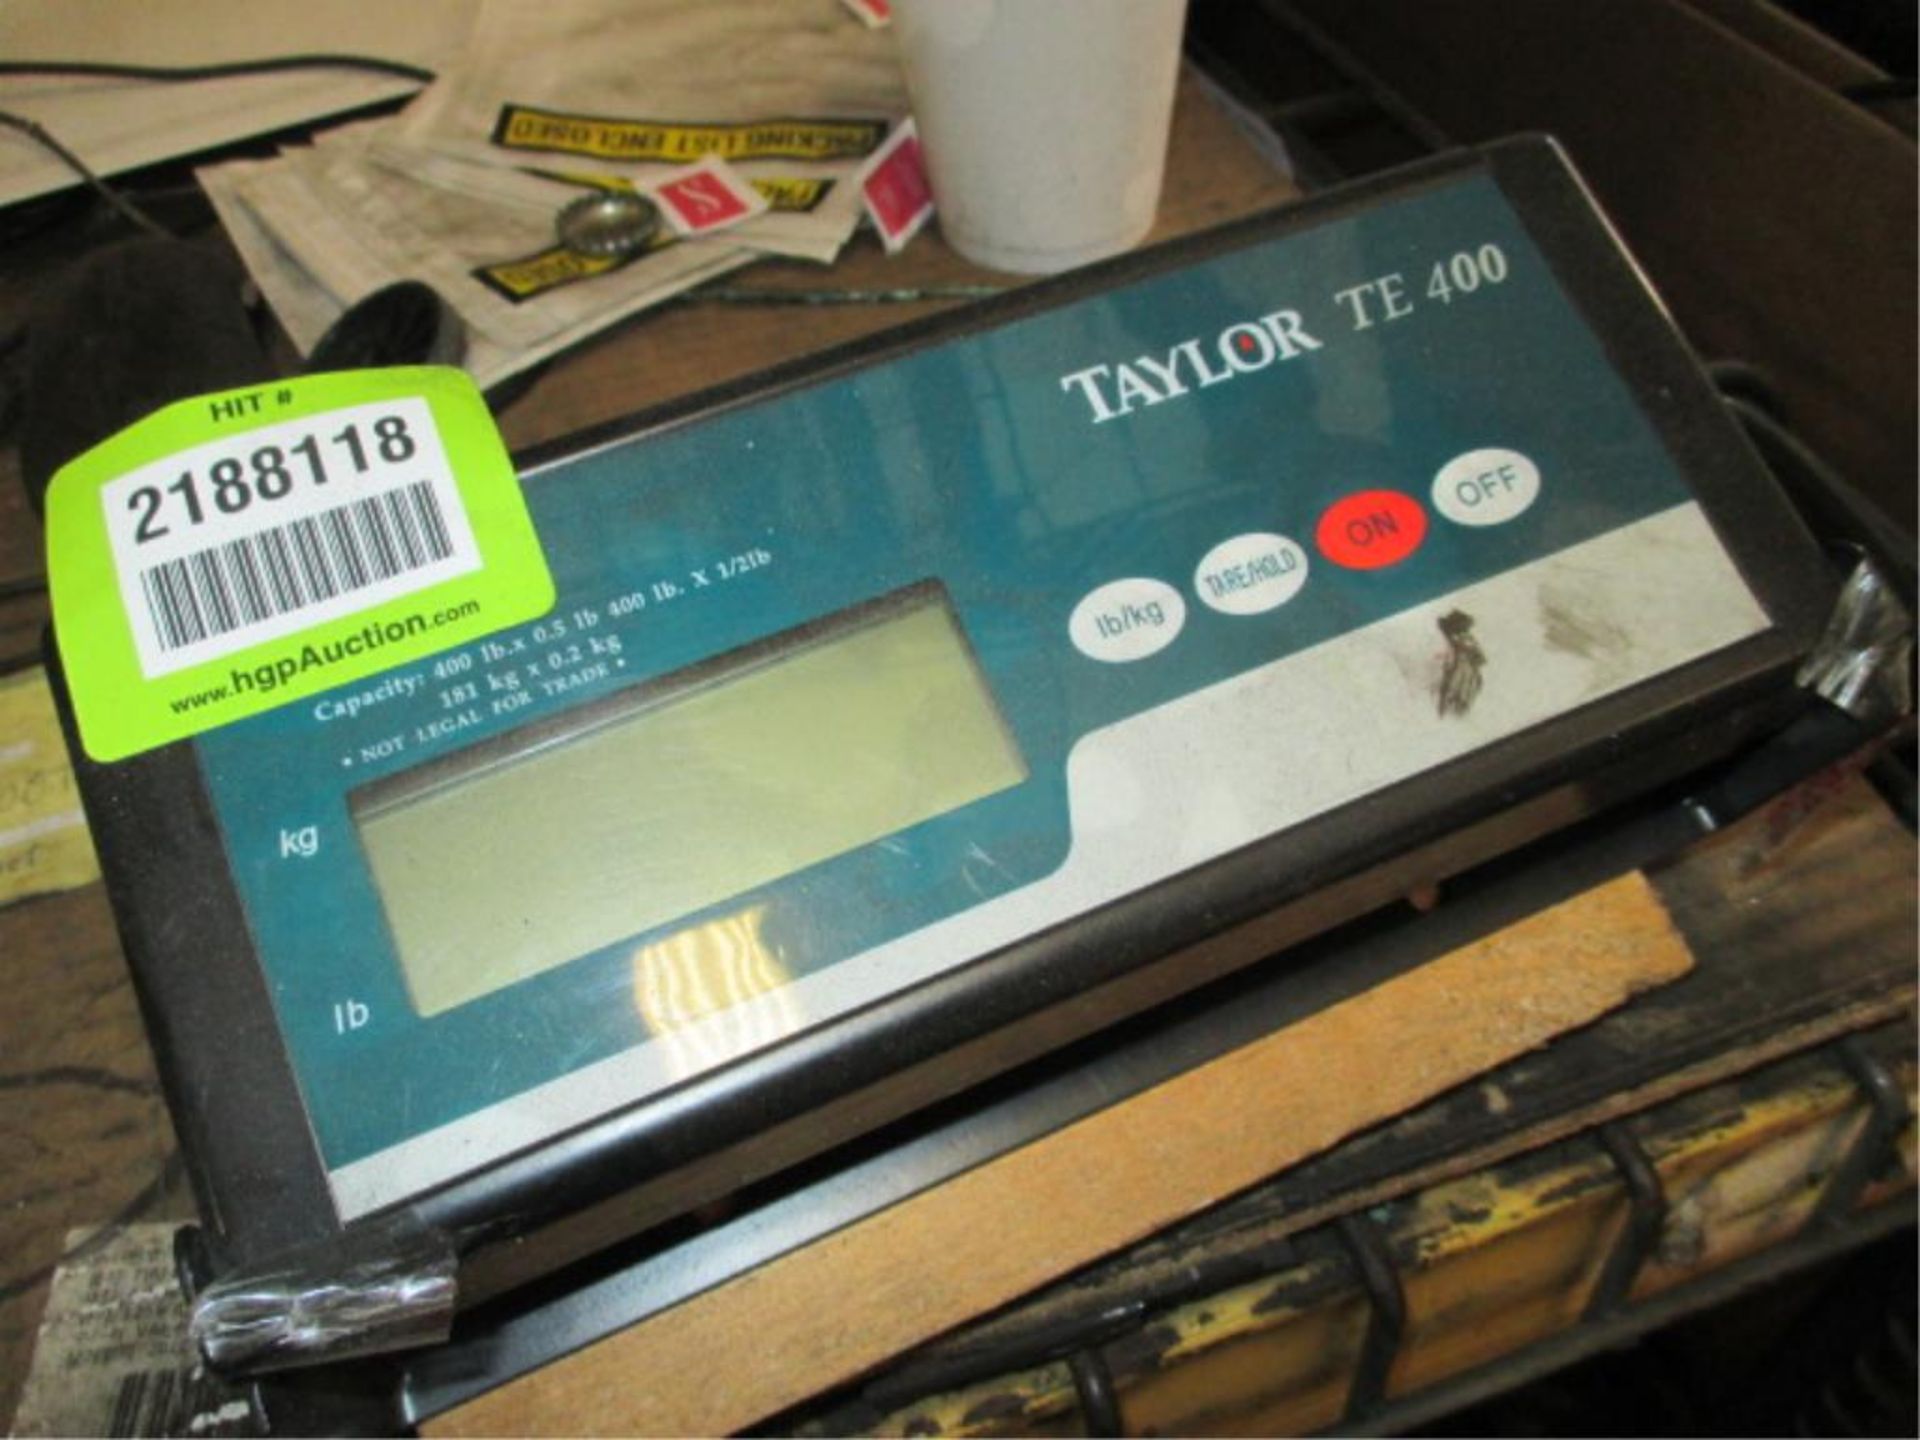 Taylor TE400 Industrial Scale, 400lbs x 0.5lbs. HIT# 2188118. Building 1. Asset(s) Located at 1578 - Image 2 of 2